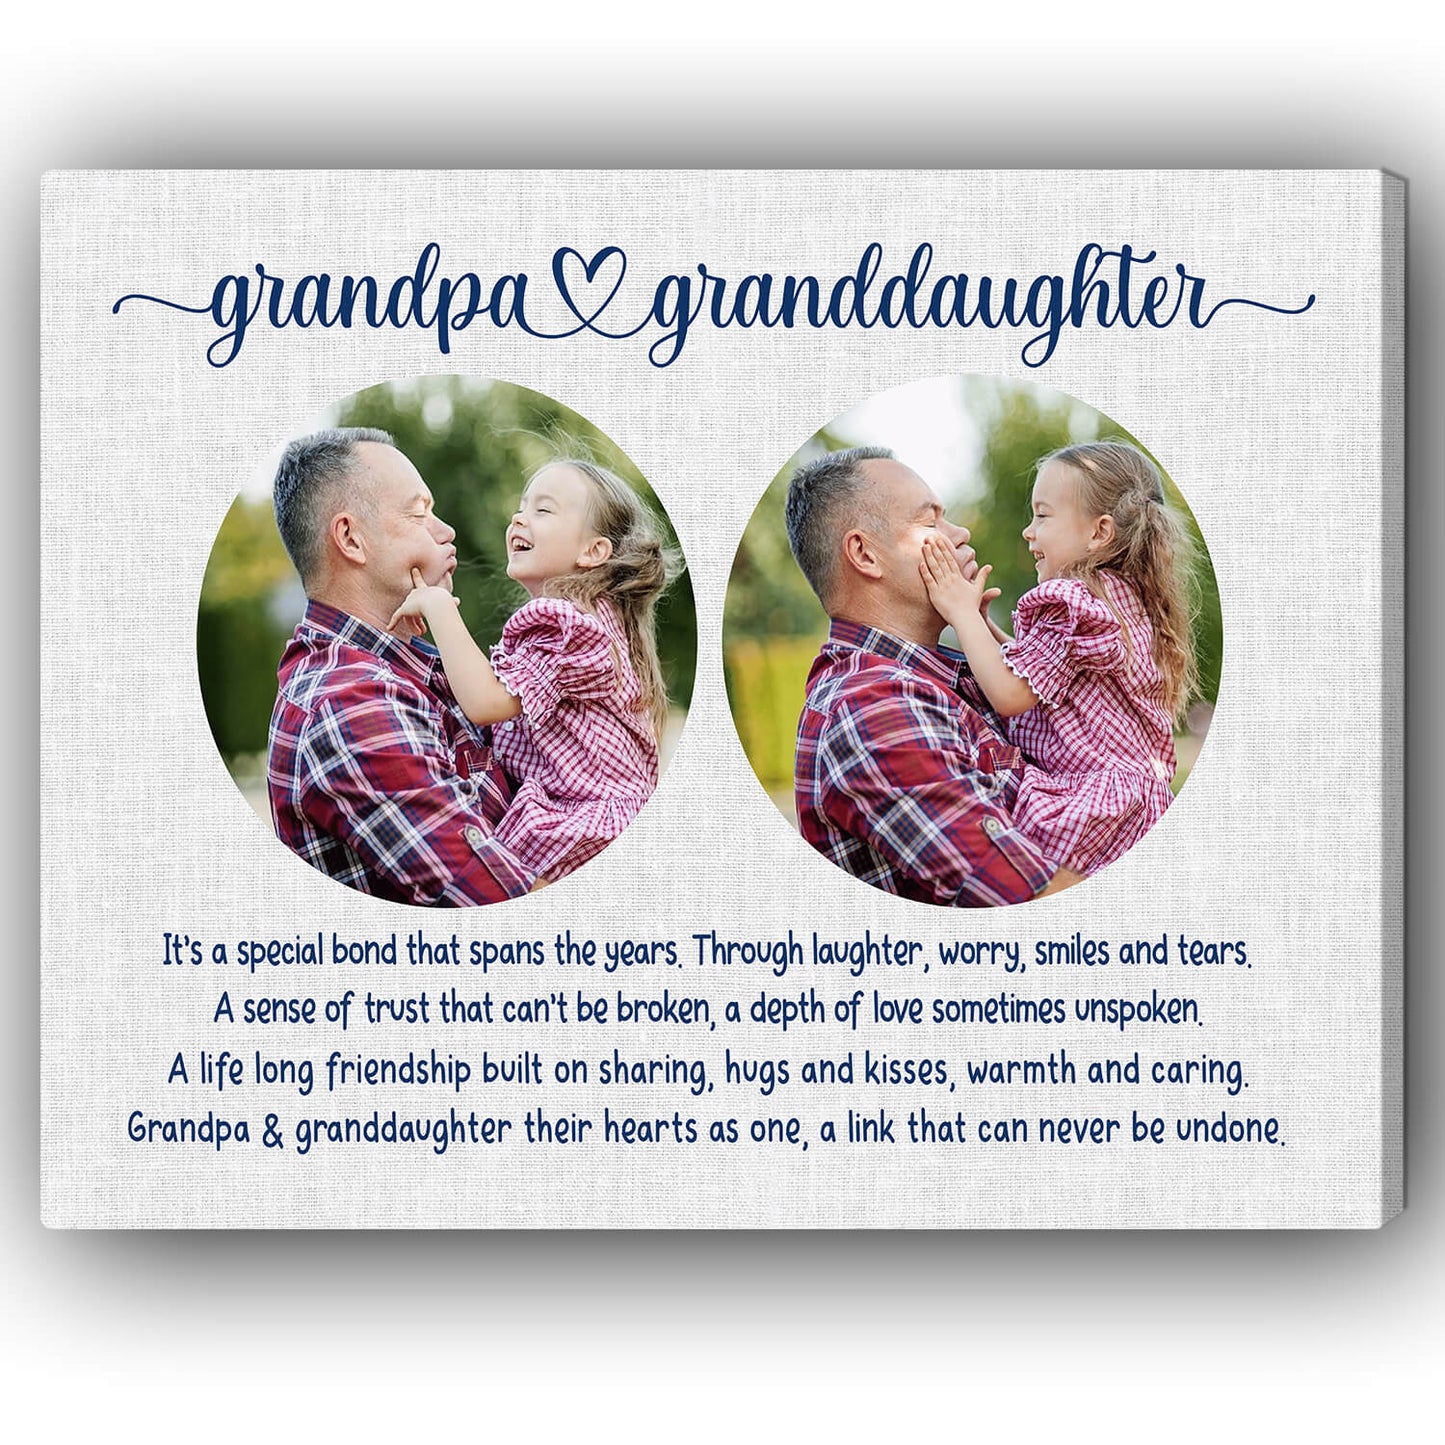 Grandpa & Granddaughter - Personalized Father's Day or Birthday gift for Grandpa - Custom Canvas Print - MyMindfulGifts